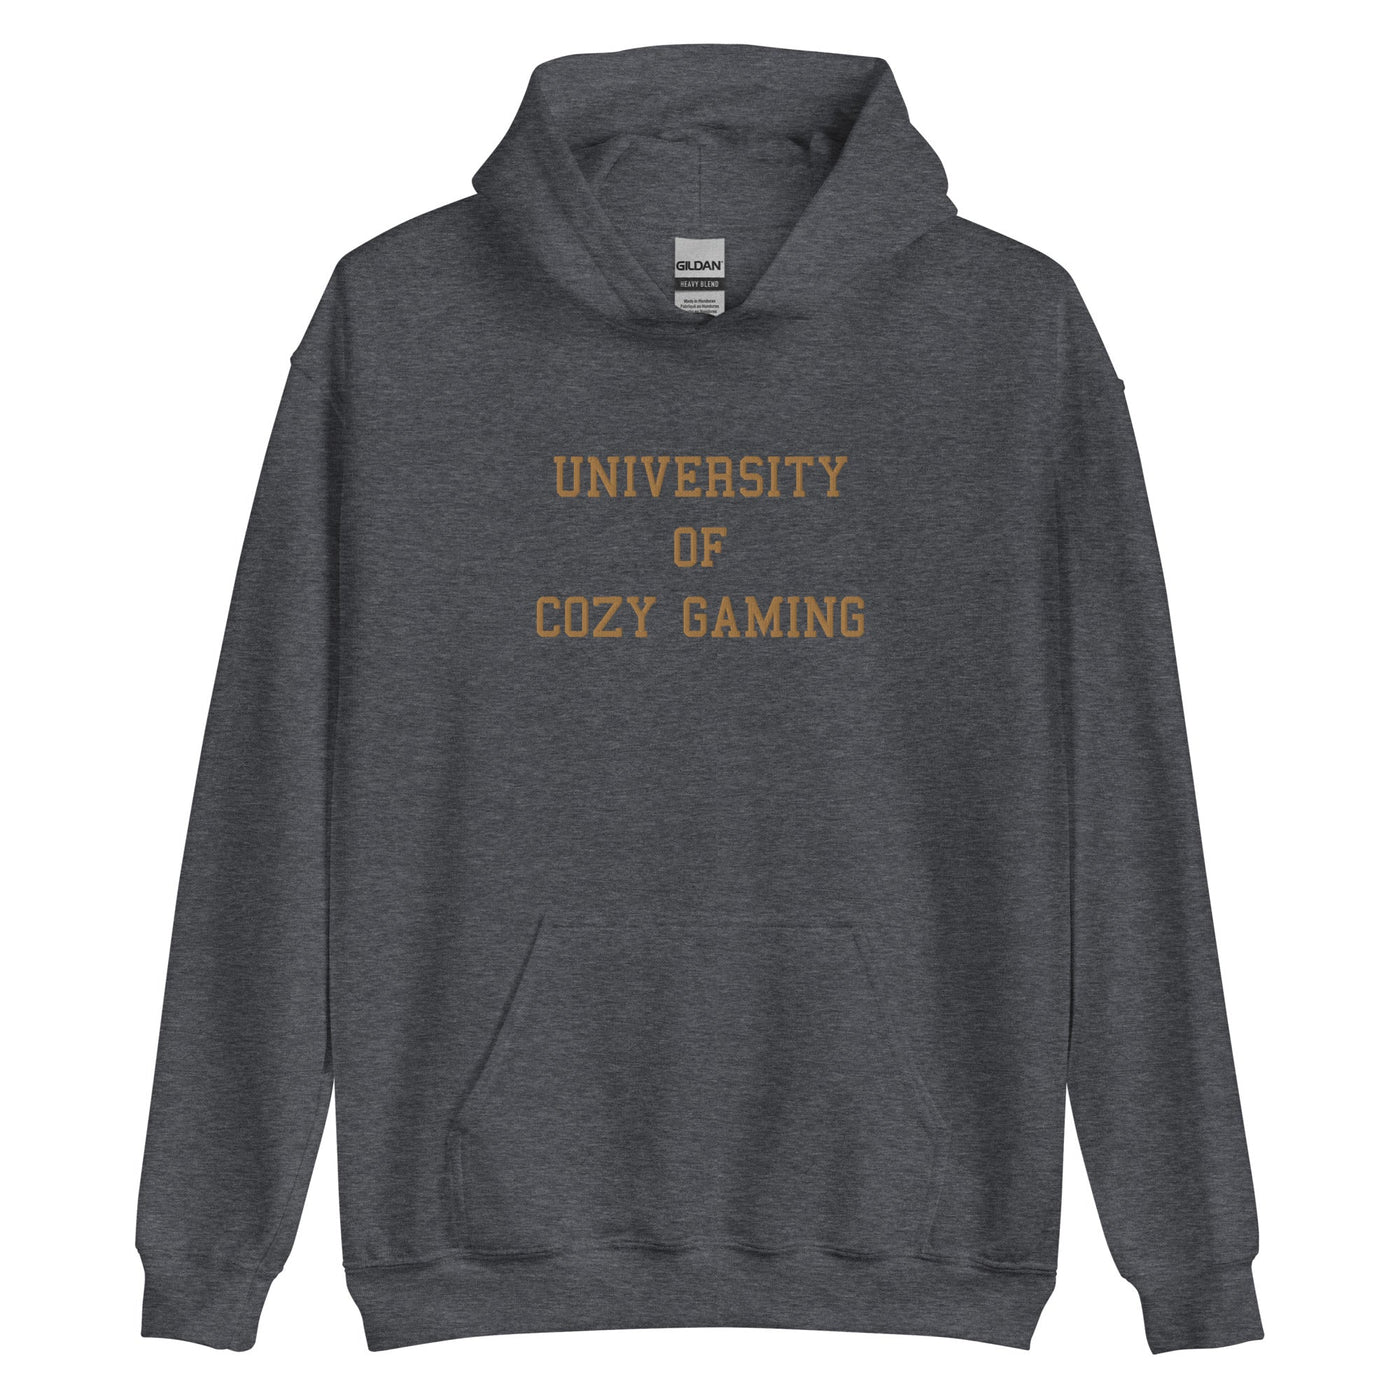 University of Cozy Gaming | Embroidered Unisex Hoodie | Cozy Gamer Threads and Thistles Inventory Dark Heather S 